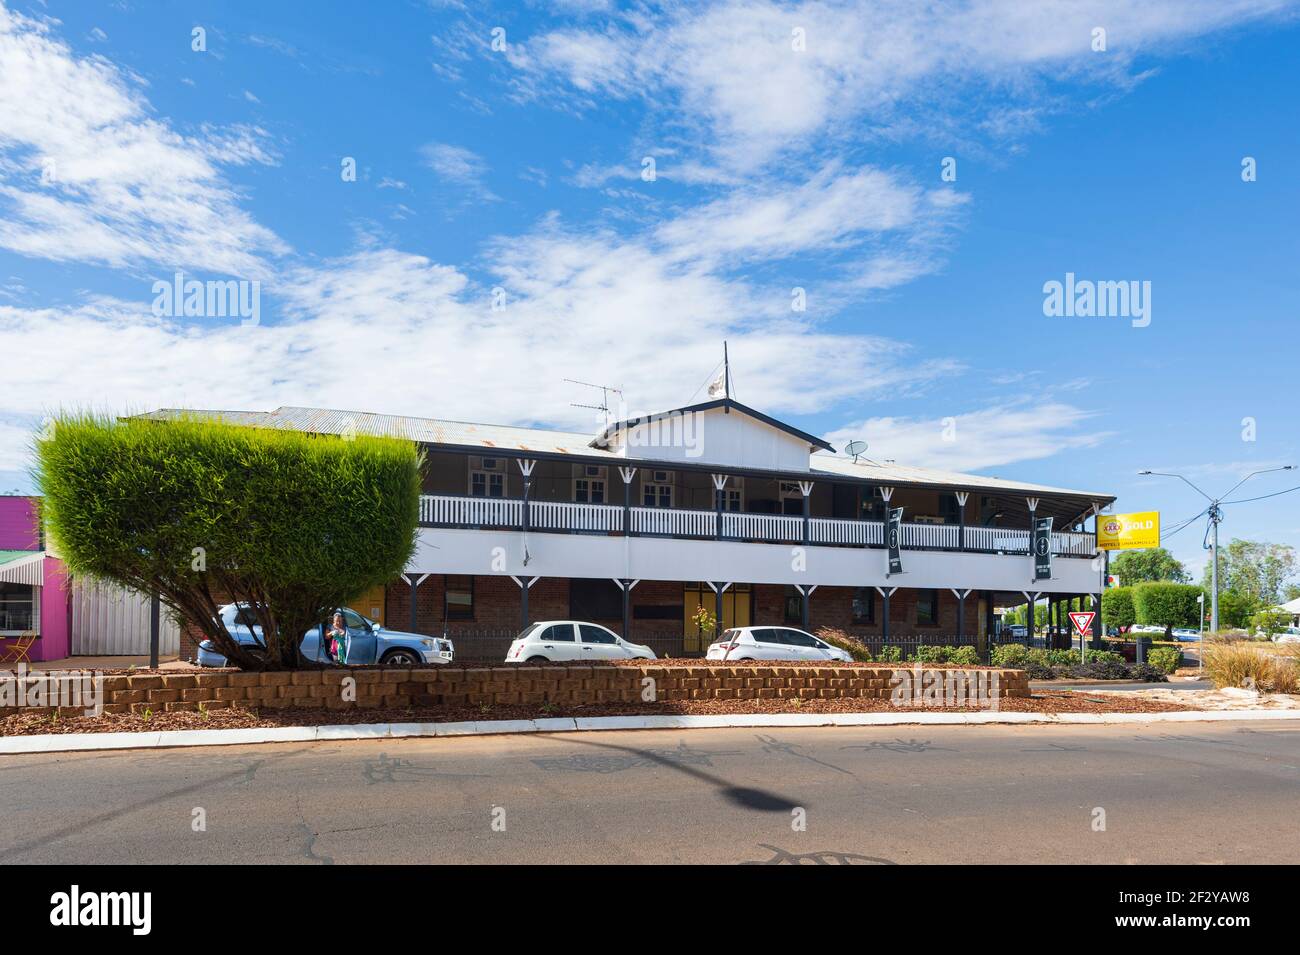 View of  the old pub Hotel Cunnamulla in Cunnamulla, a small rural town in the Paroo Shire, Queensland, QLD, Australia Stock Photo